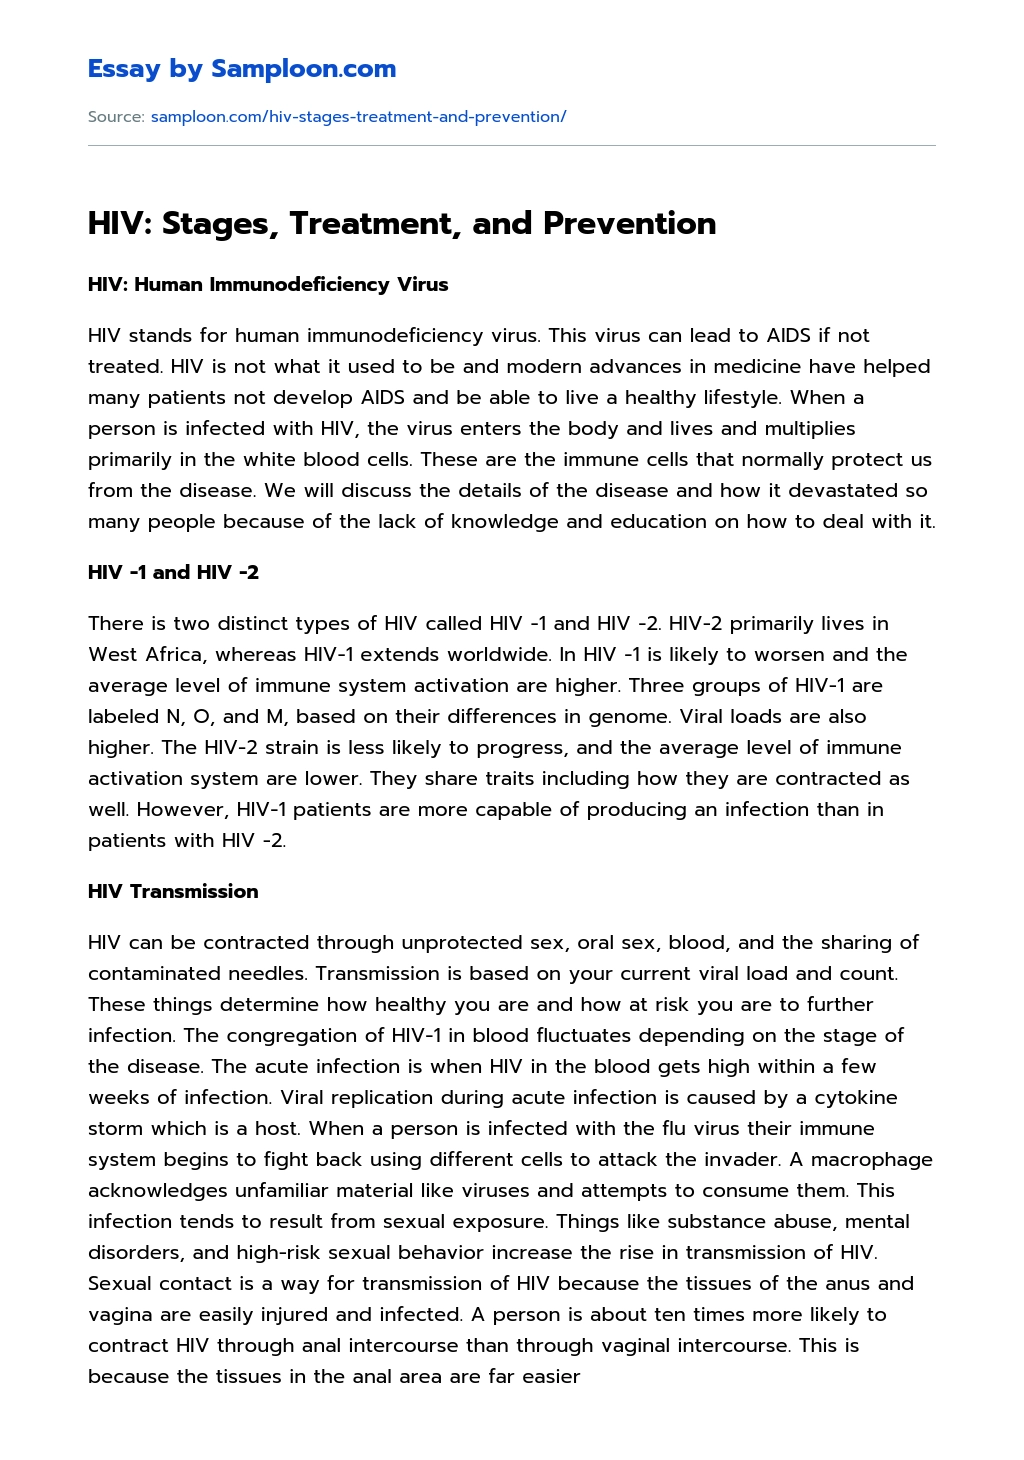 HIV: Stages, Treatment, and Prevention essay